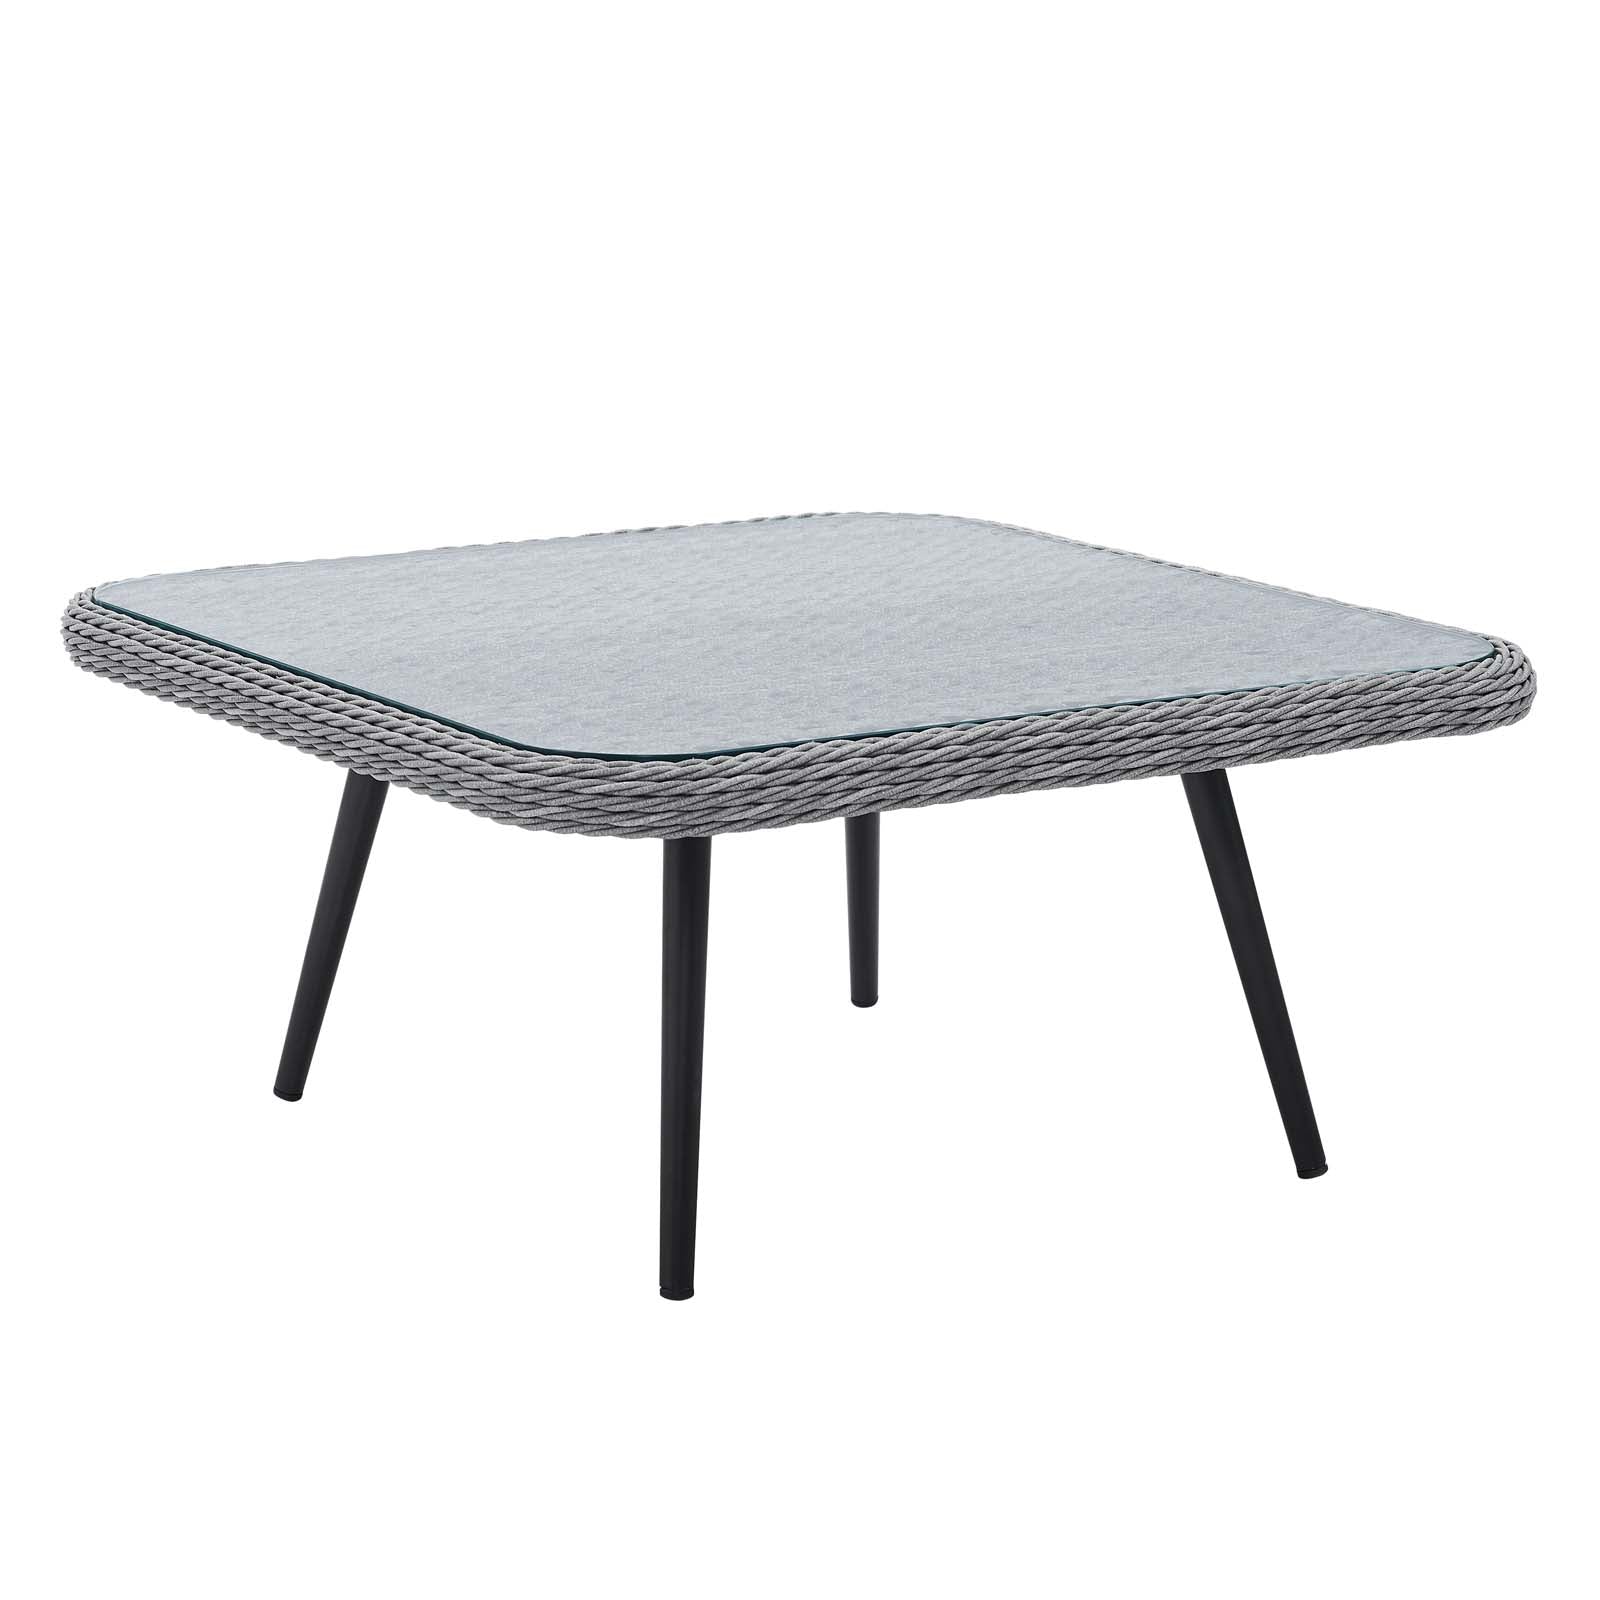 Modway Outdoor Coffee Tables - Endeavor Outdoor Patio Wicker Rattan Square Coffee Table Gray